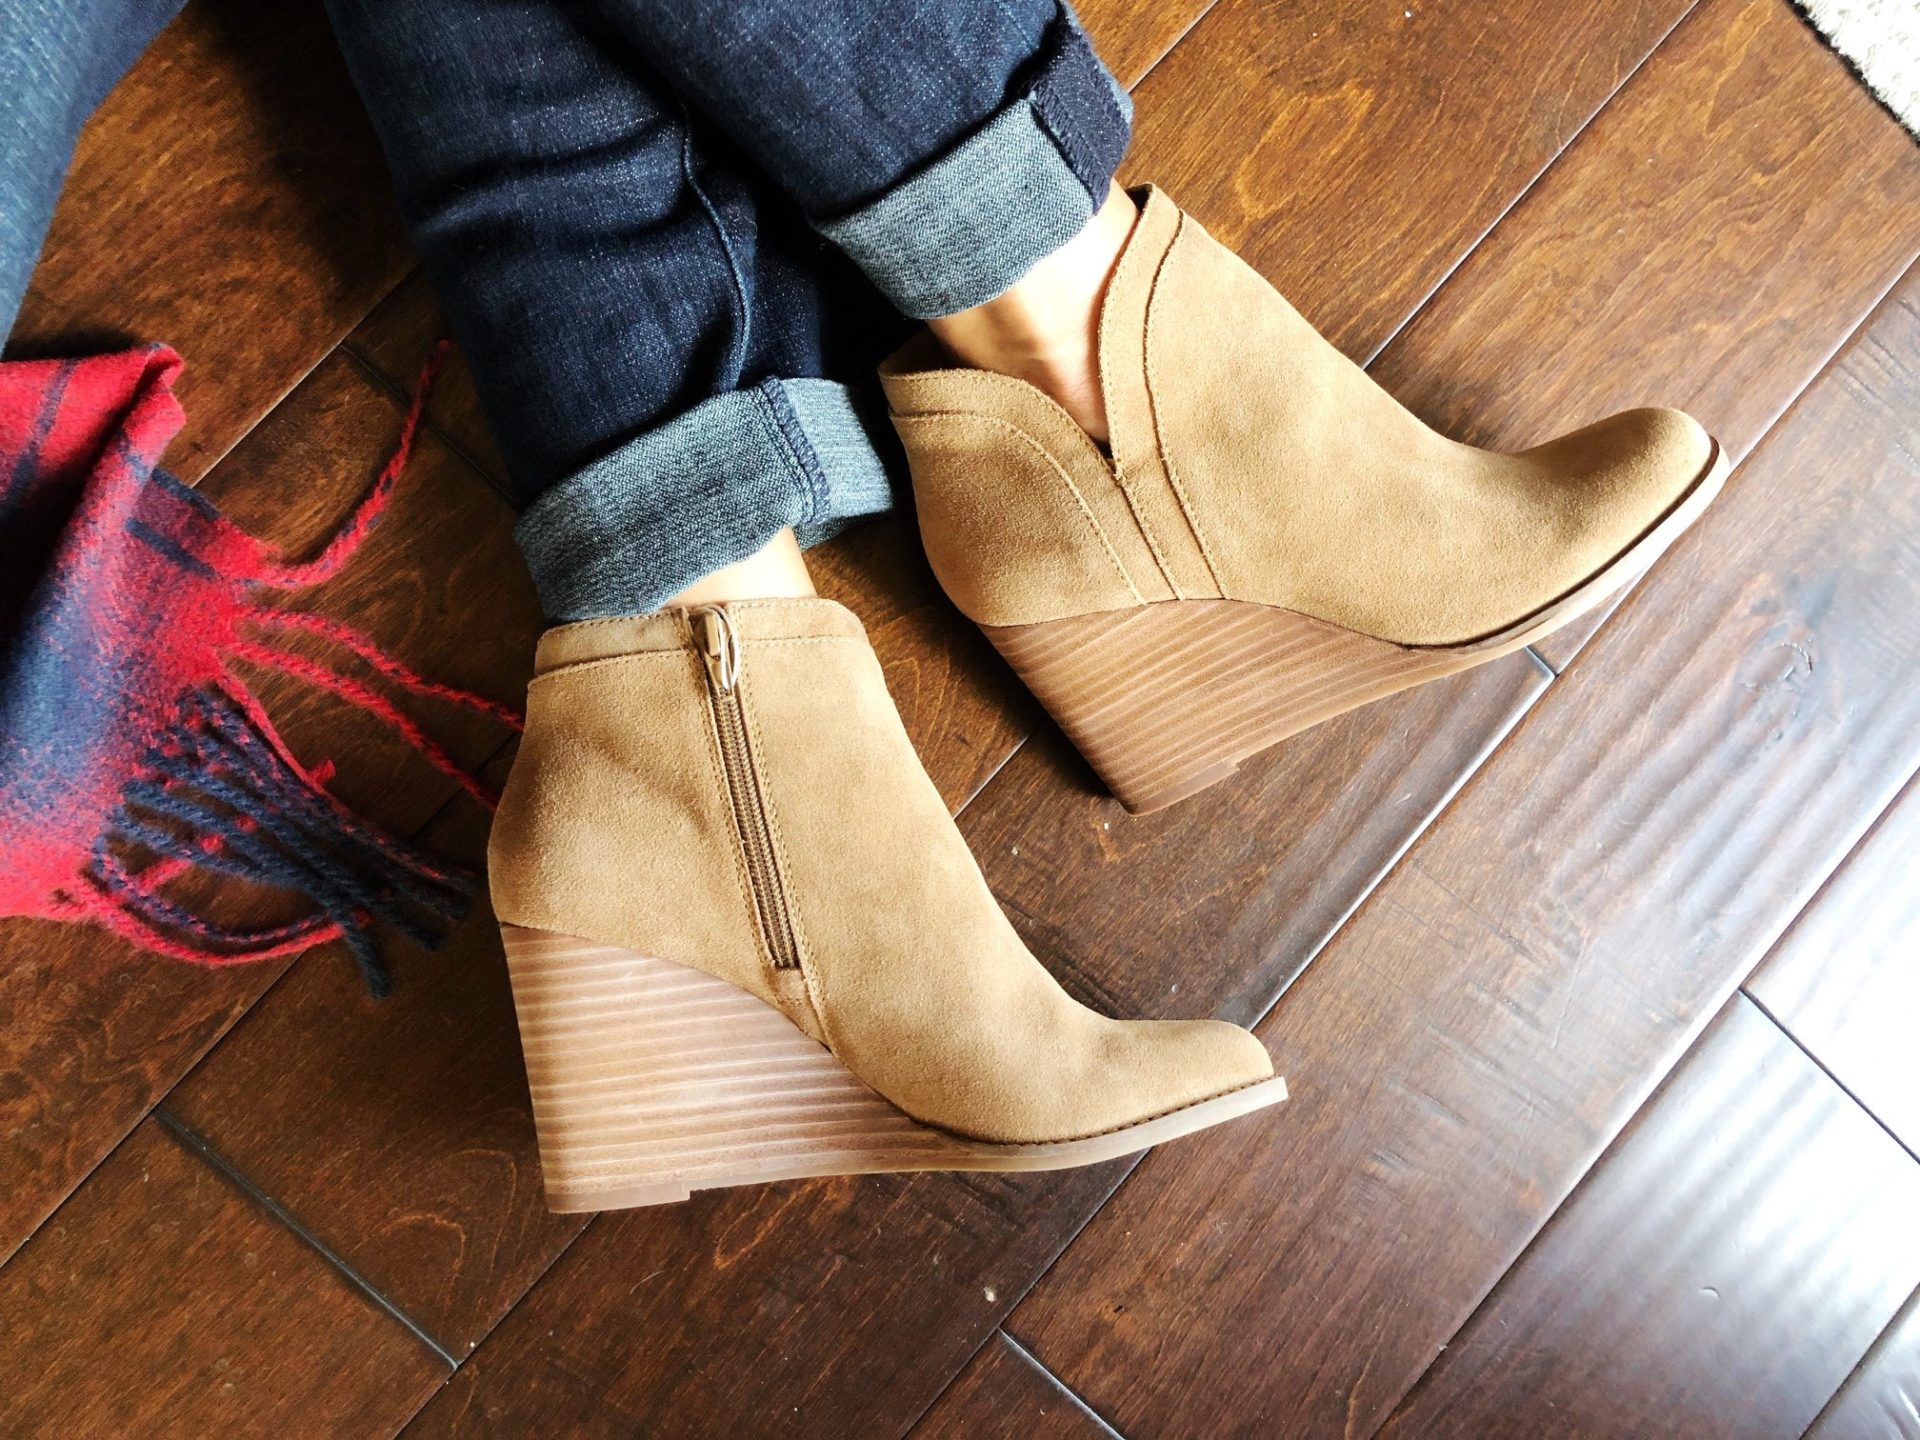 Boots + Booties I'm Wearing this Fall 